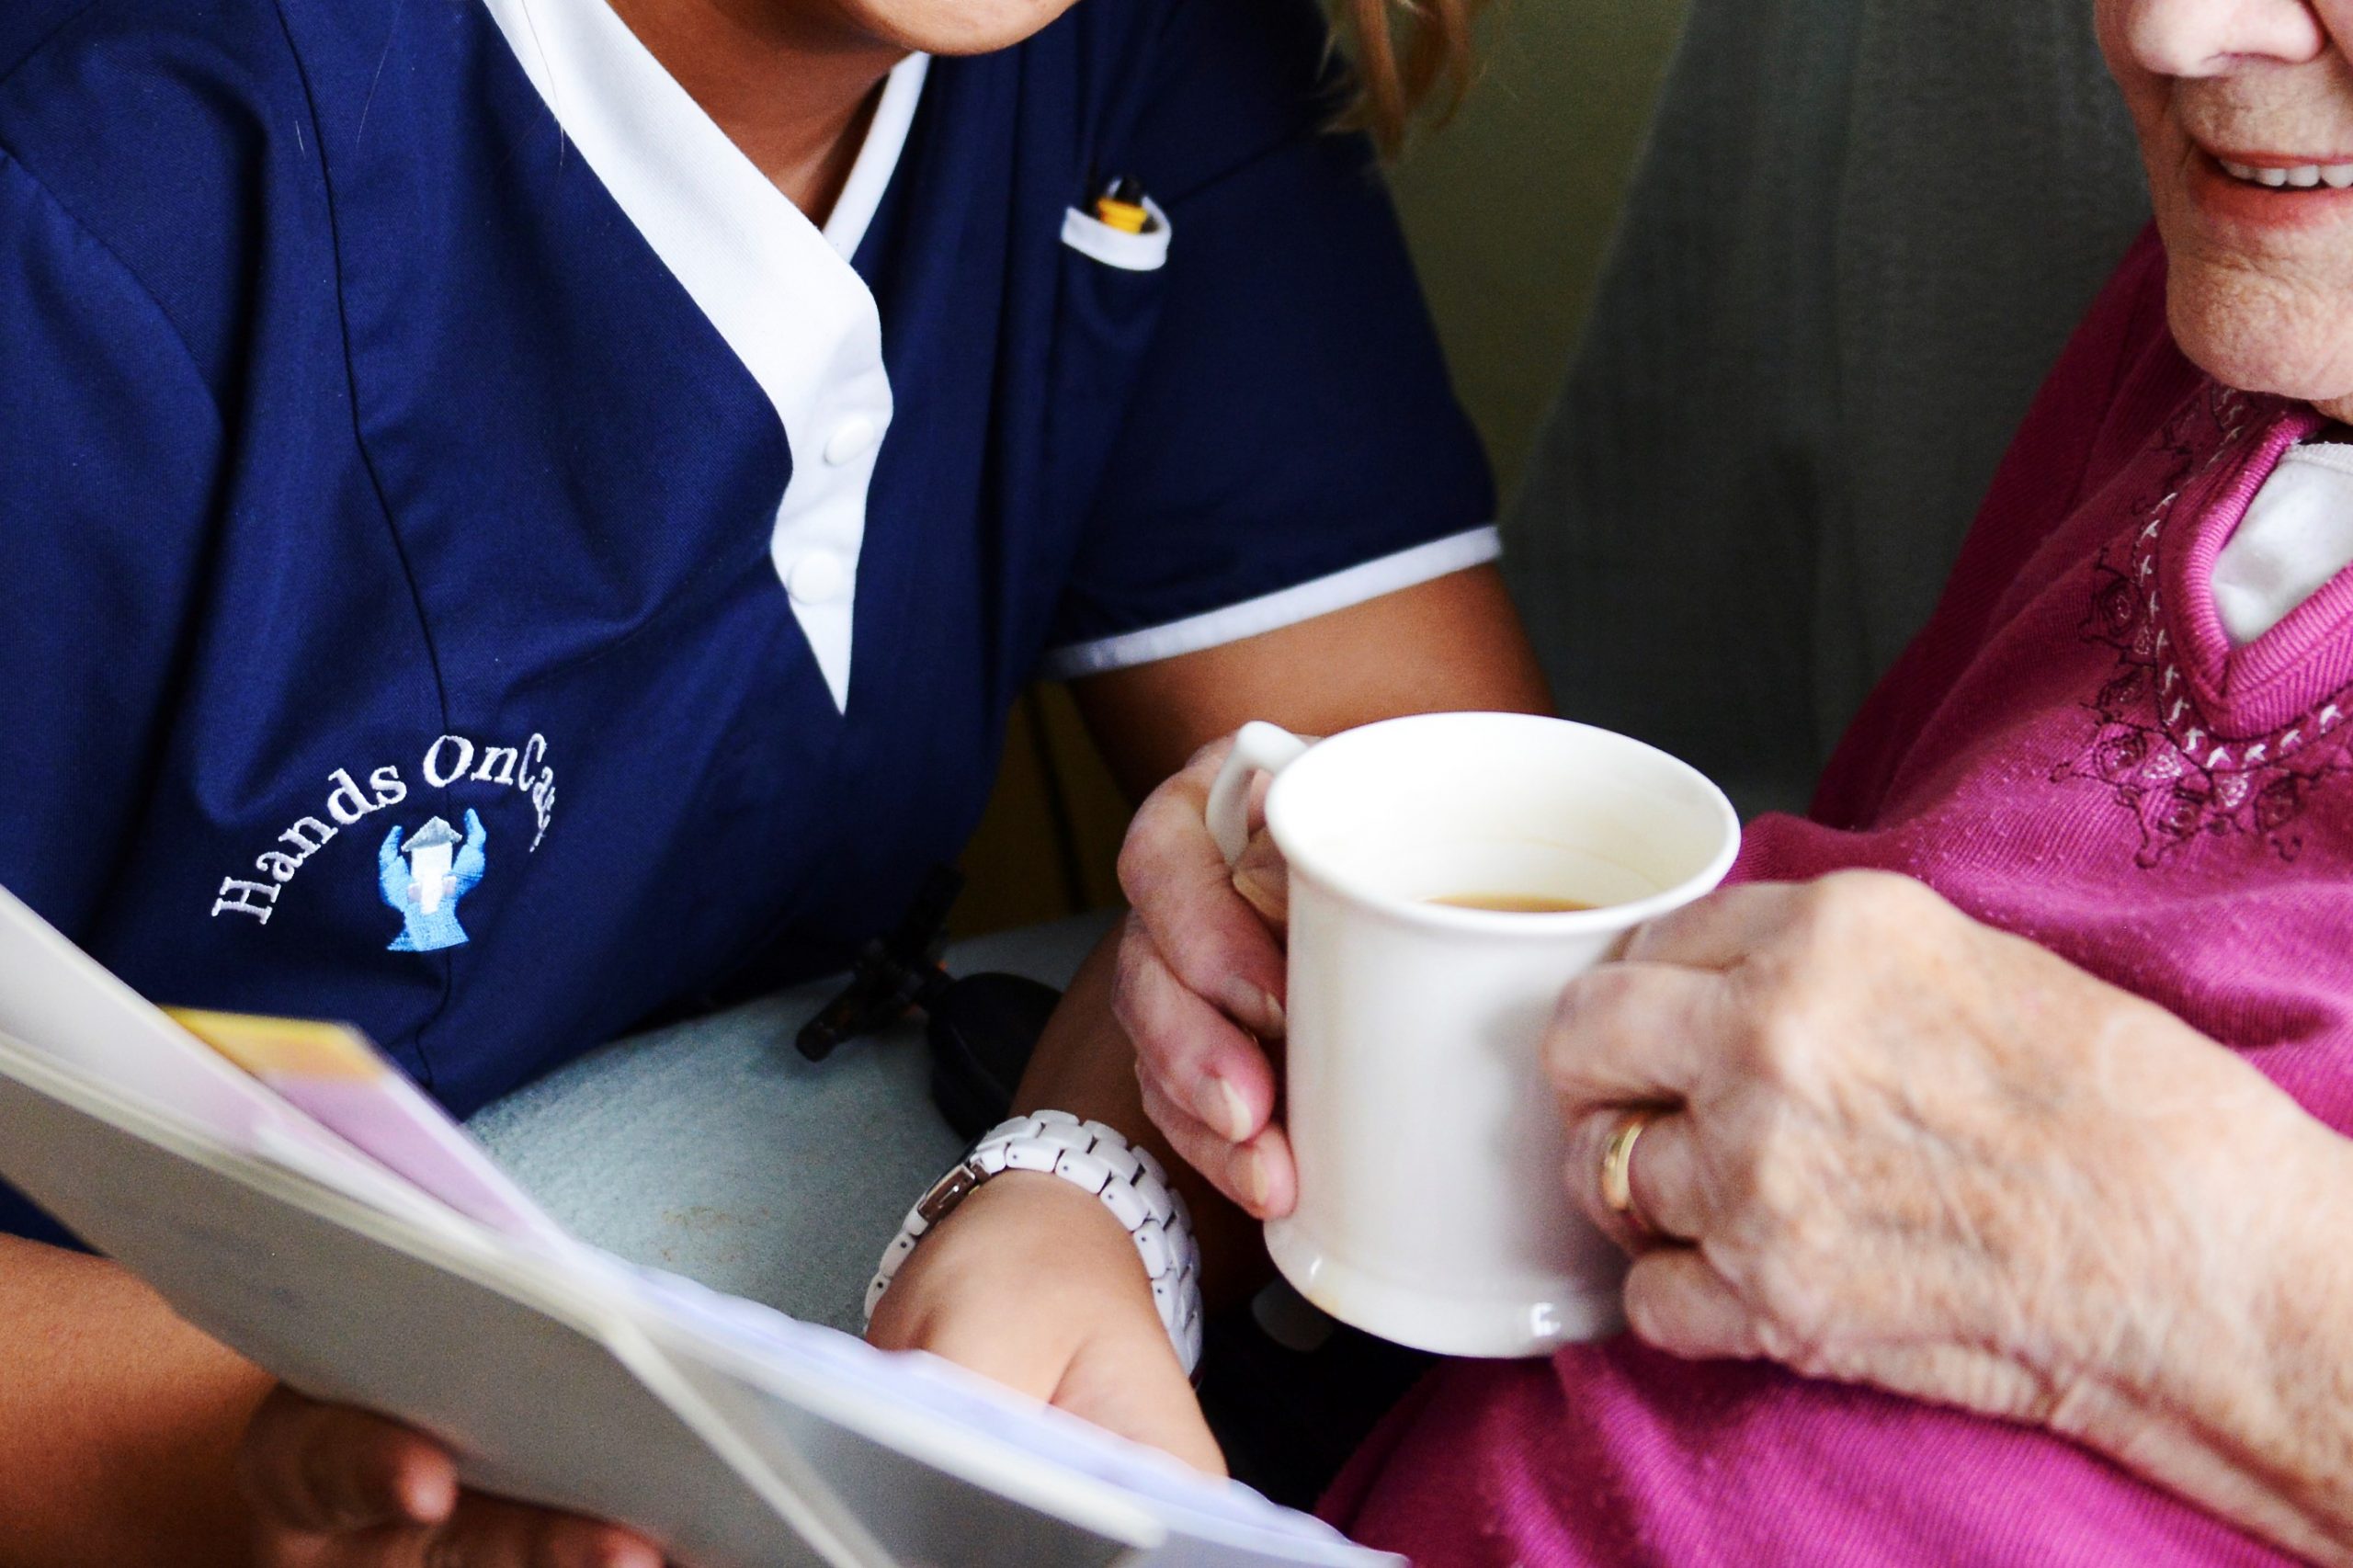 Hands on Care caregiver talking to a resident holding a cup of tea